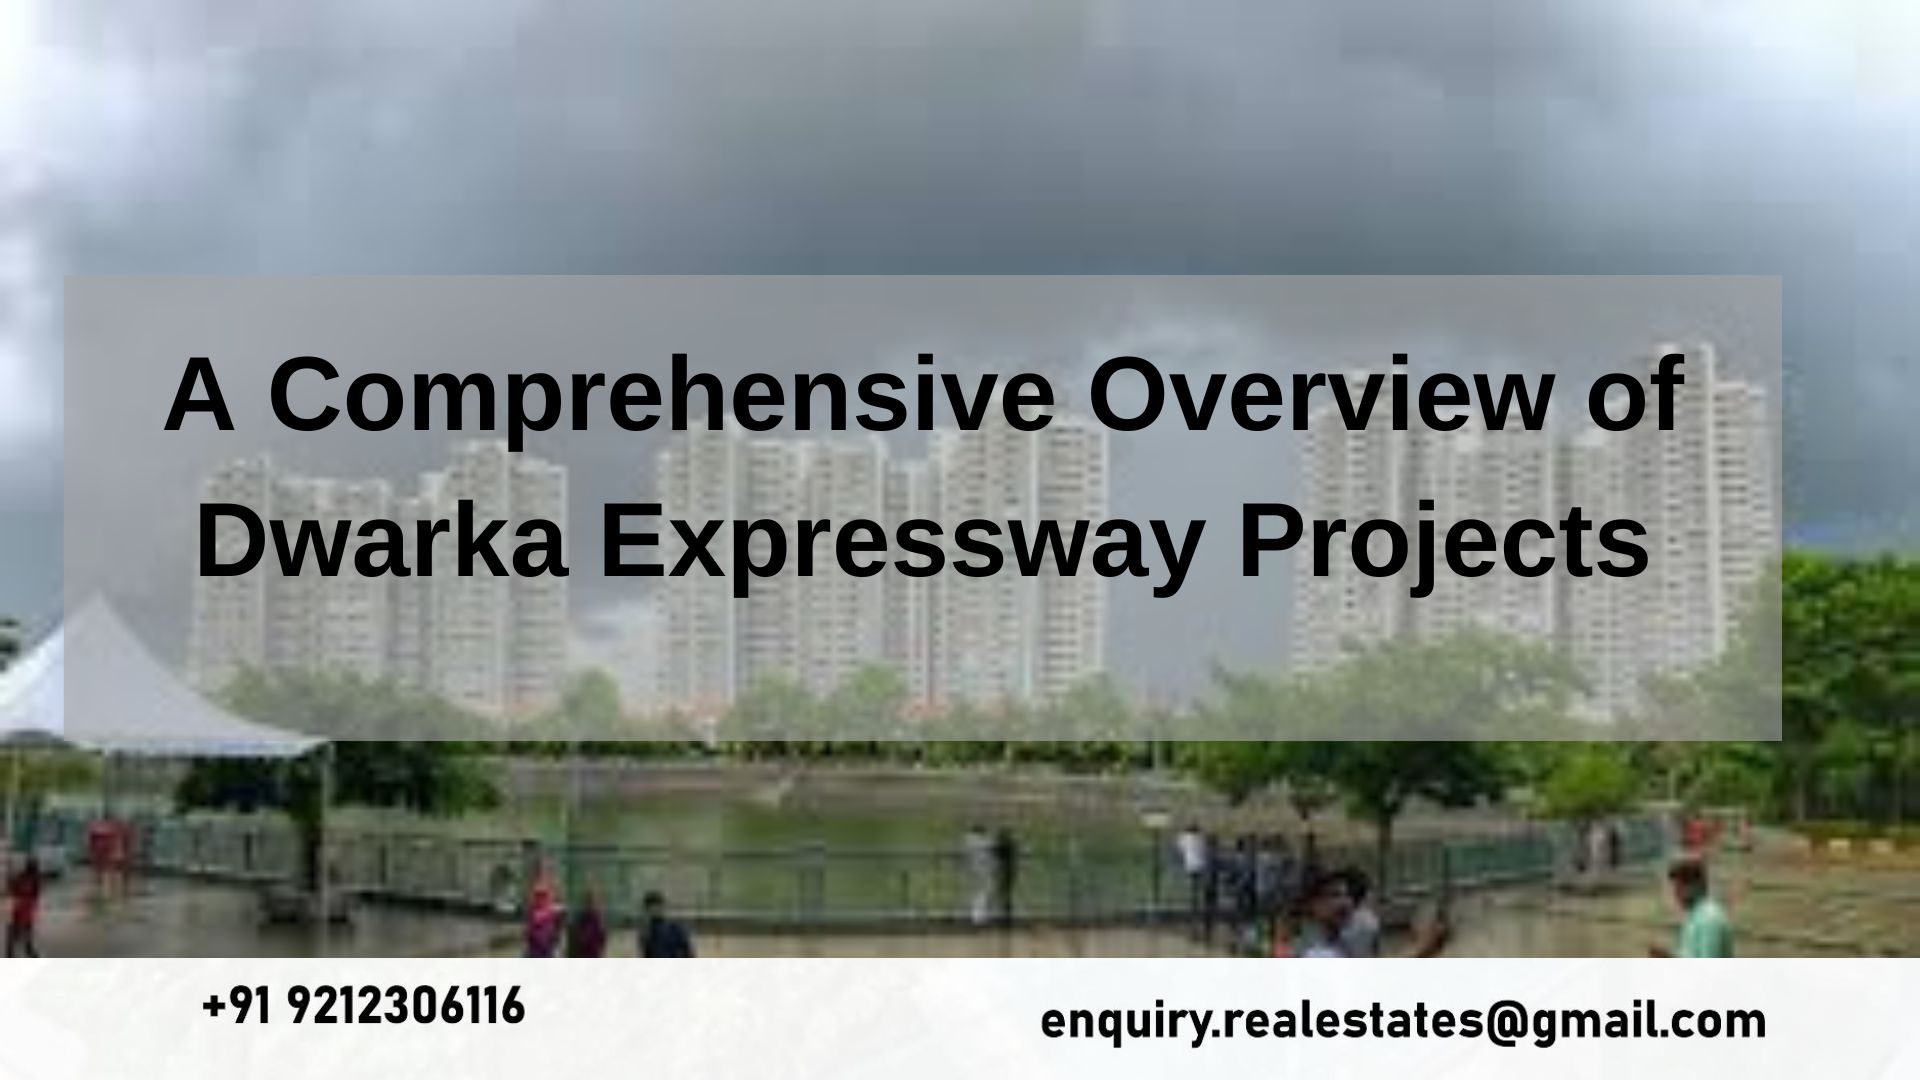 A Comprehensive Overview of Dwarka Expressway Projects